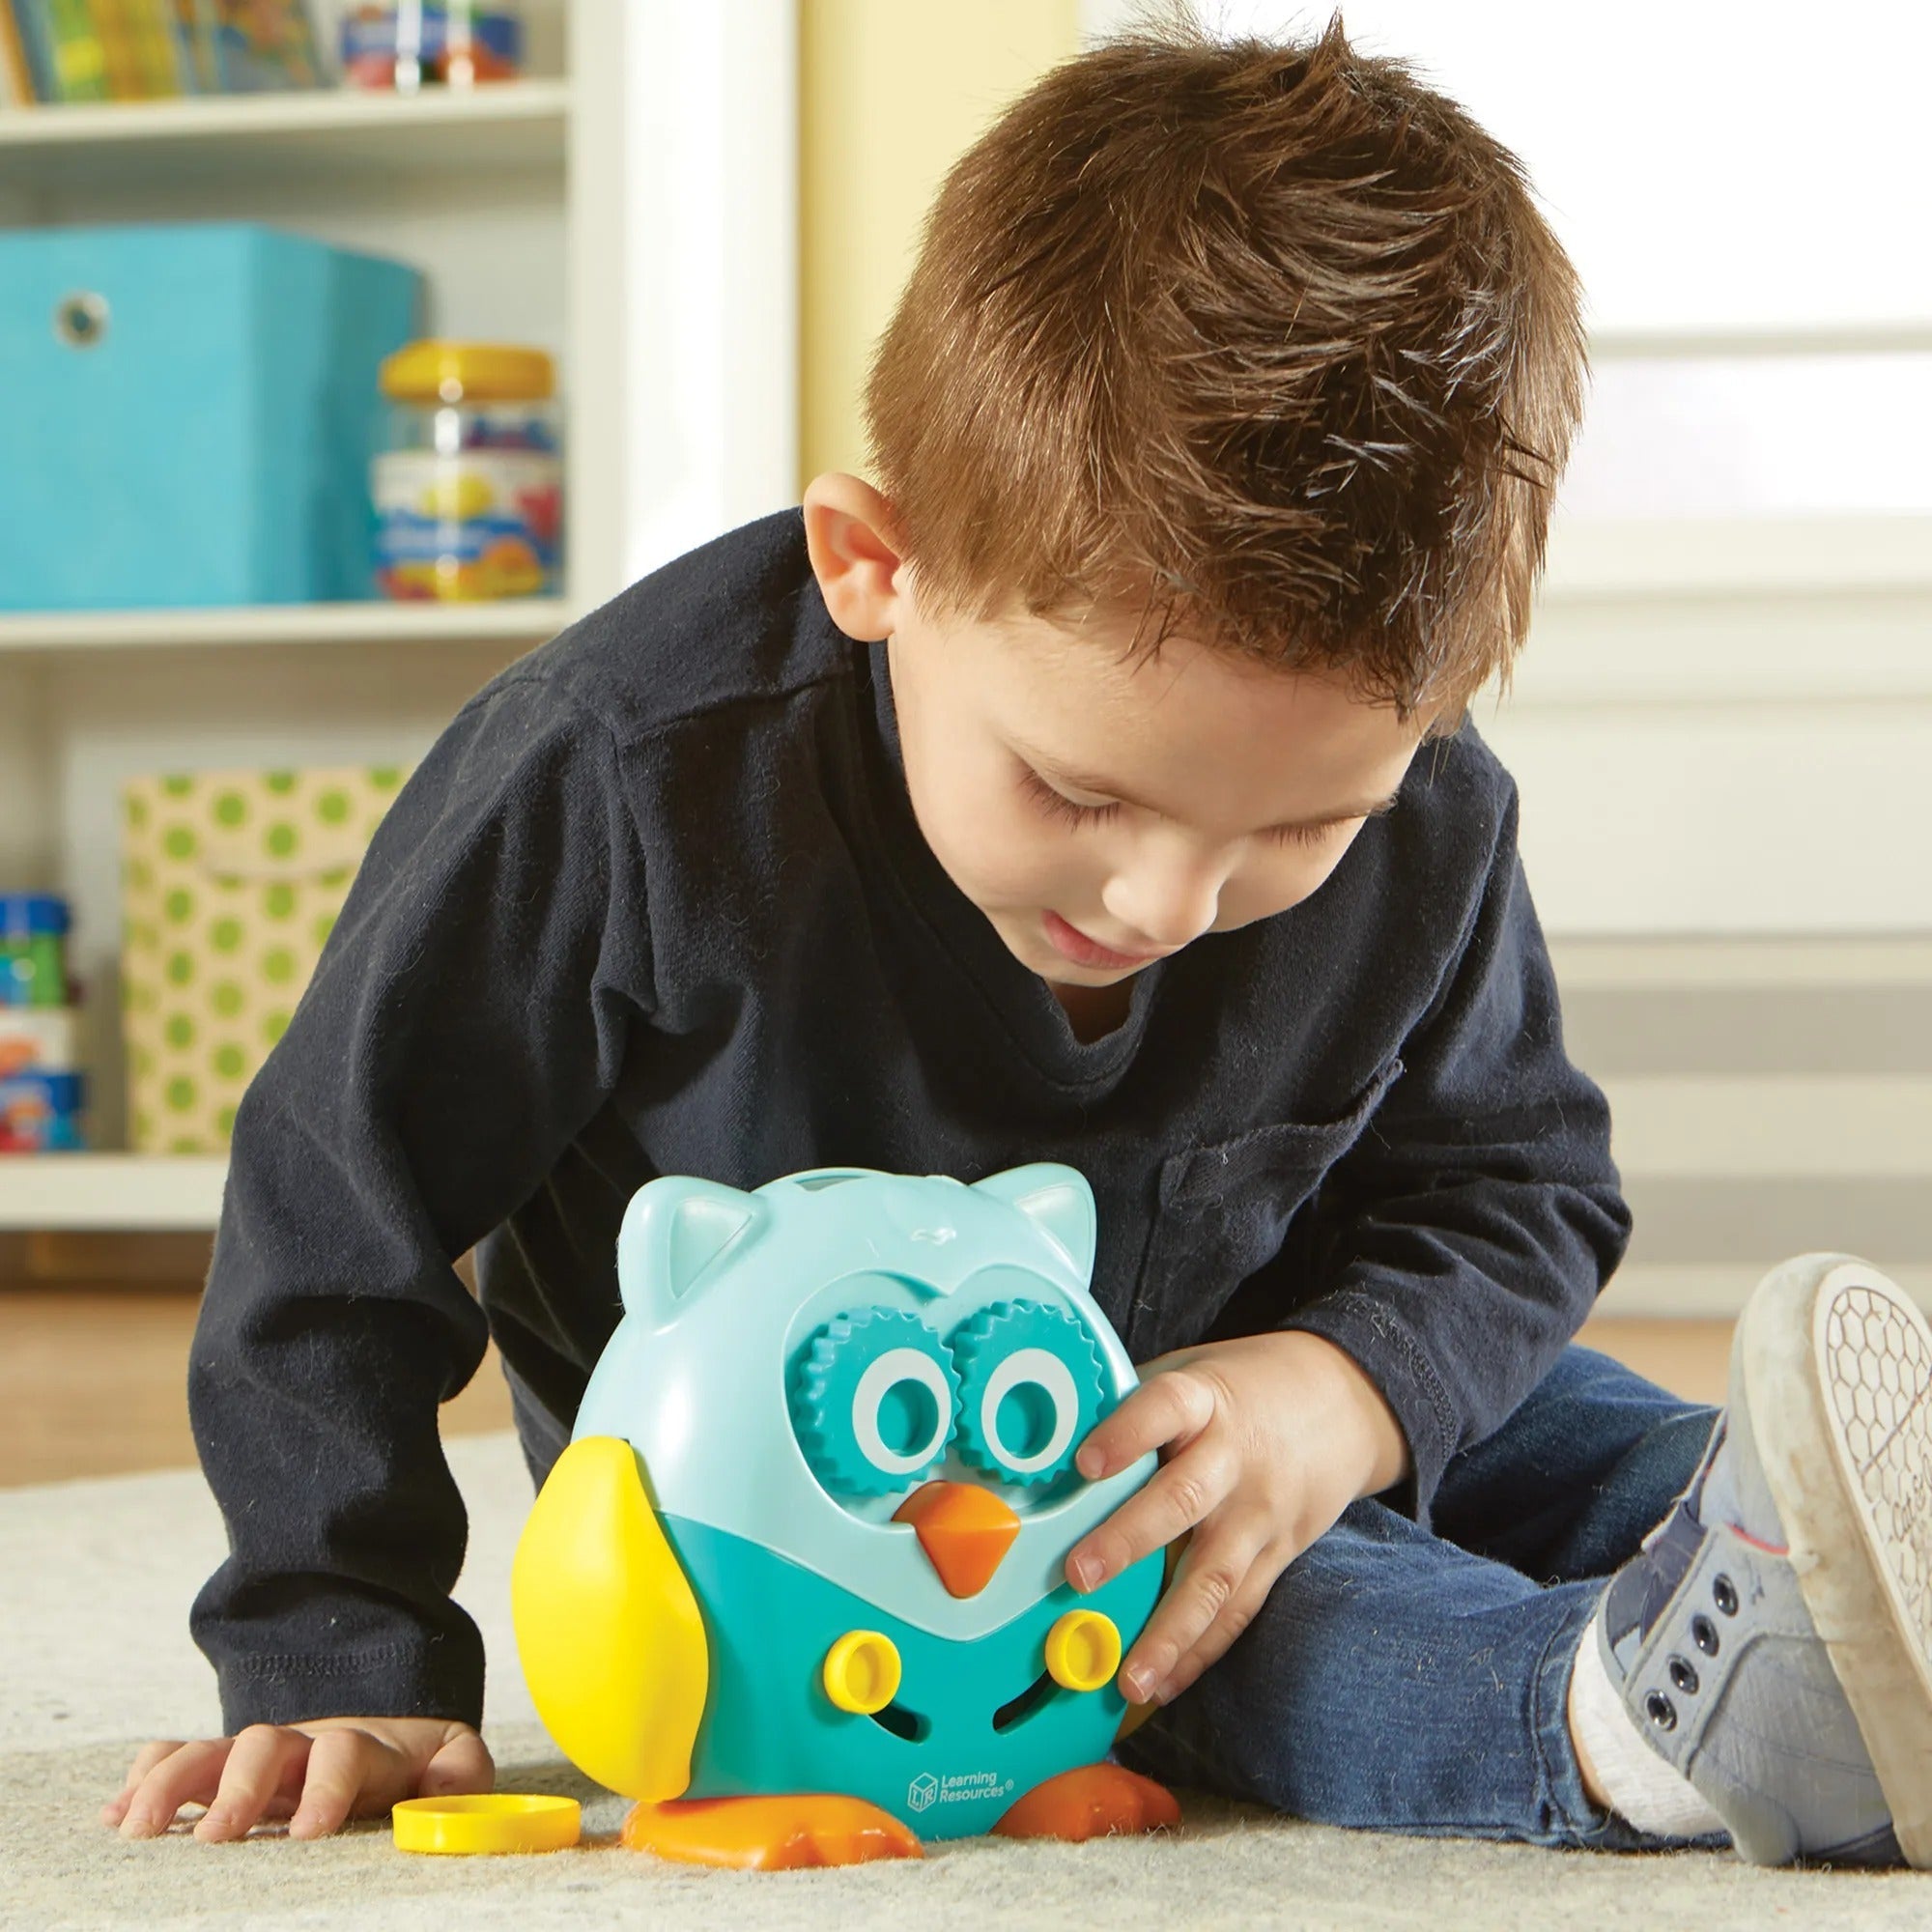 Hoot the Fine Motor Owl, Discover Hoot the Fine Motor Owl! Use the coloured coin counters with different functions on the owl, helping children learn strength, hand-eye coordination, grip and scissor skills through five fun hands-on activities. Hoot Hoot! Whoooooo's that adorable owl? It's Hoot the Fine Motor Owl, a wise addition to the collection of fine motor toys for toddlers! Inspired by our bestselling Spike the Fine Motor Hedgehog. Hoot is here to help kids prepare for preschool success with four fun 